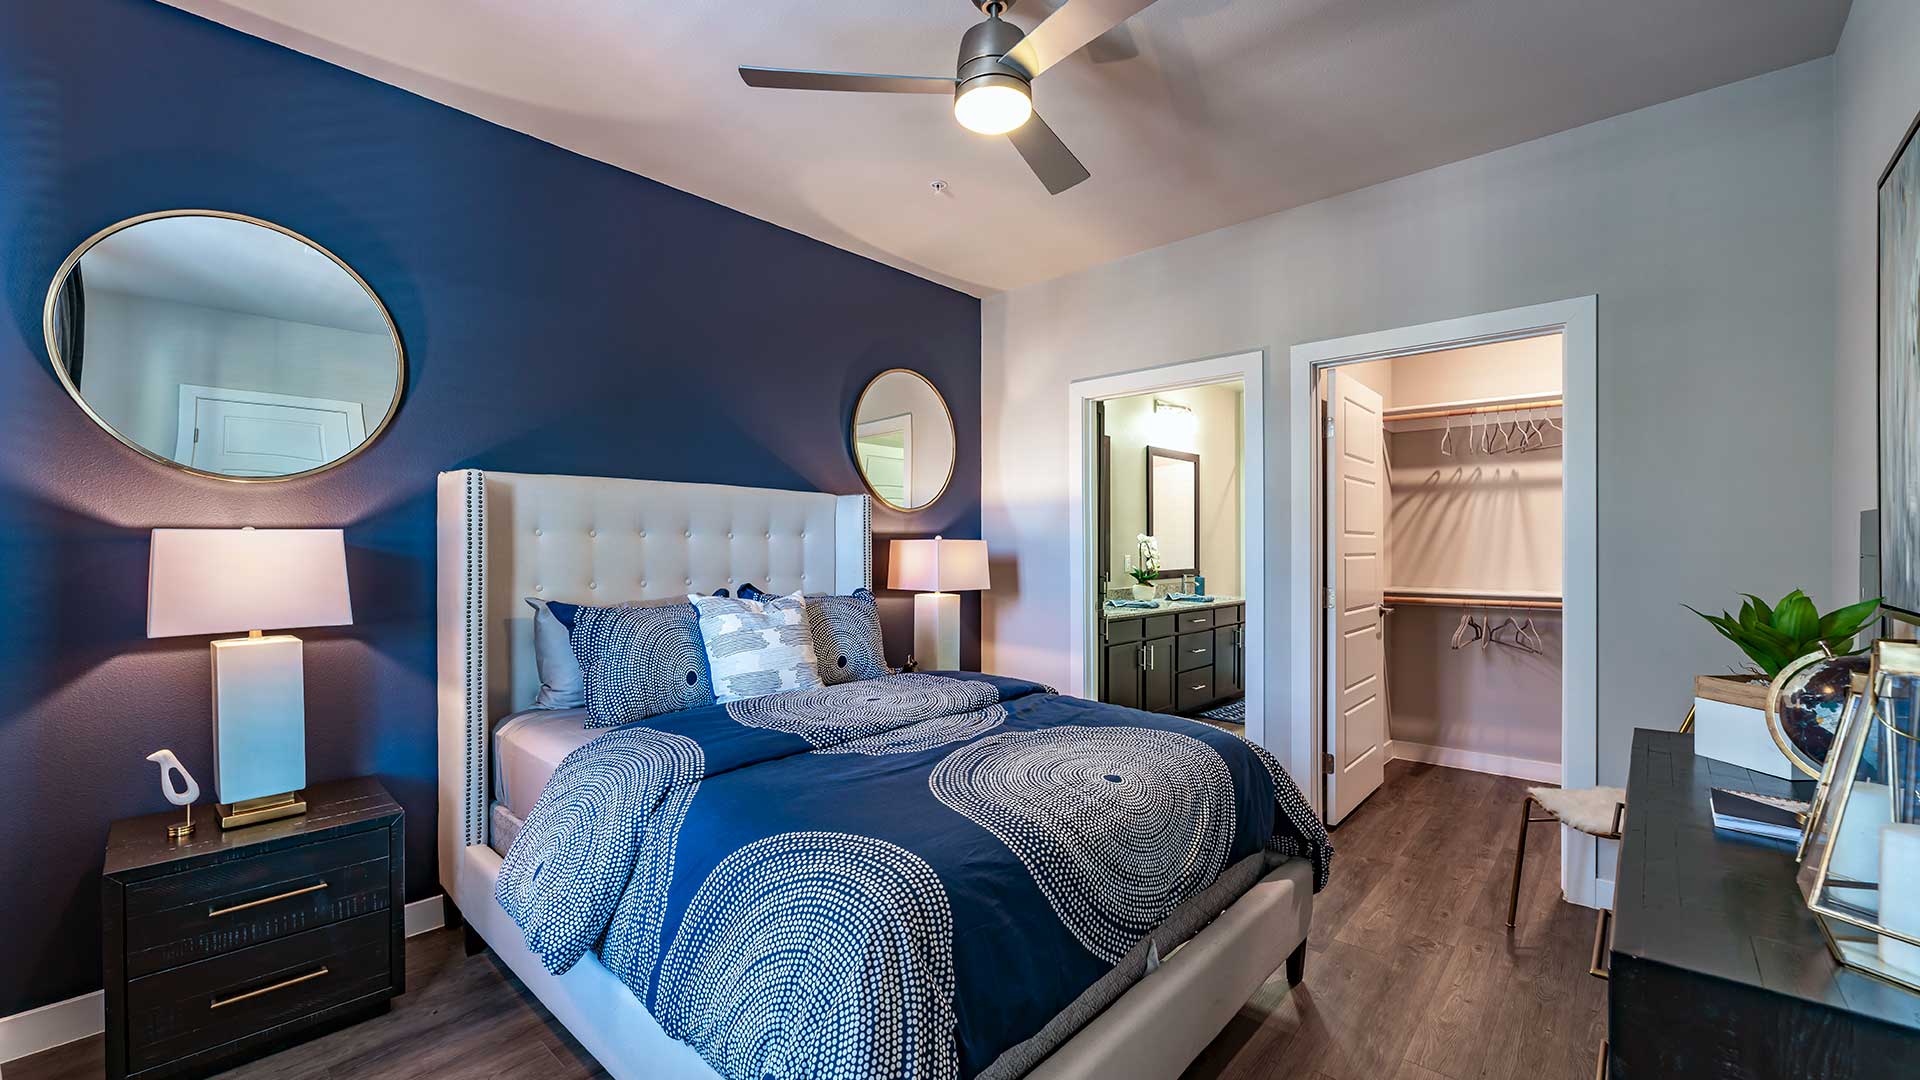 Modern bedroom with a navy and white color scheme, featuring a plush bed, circular mirror, bedside lamps, and an open closet.